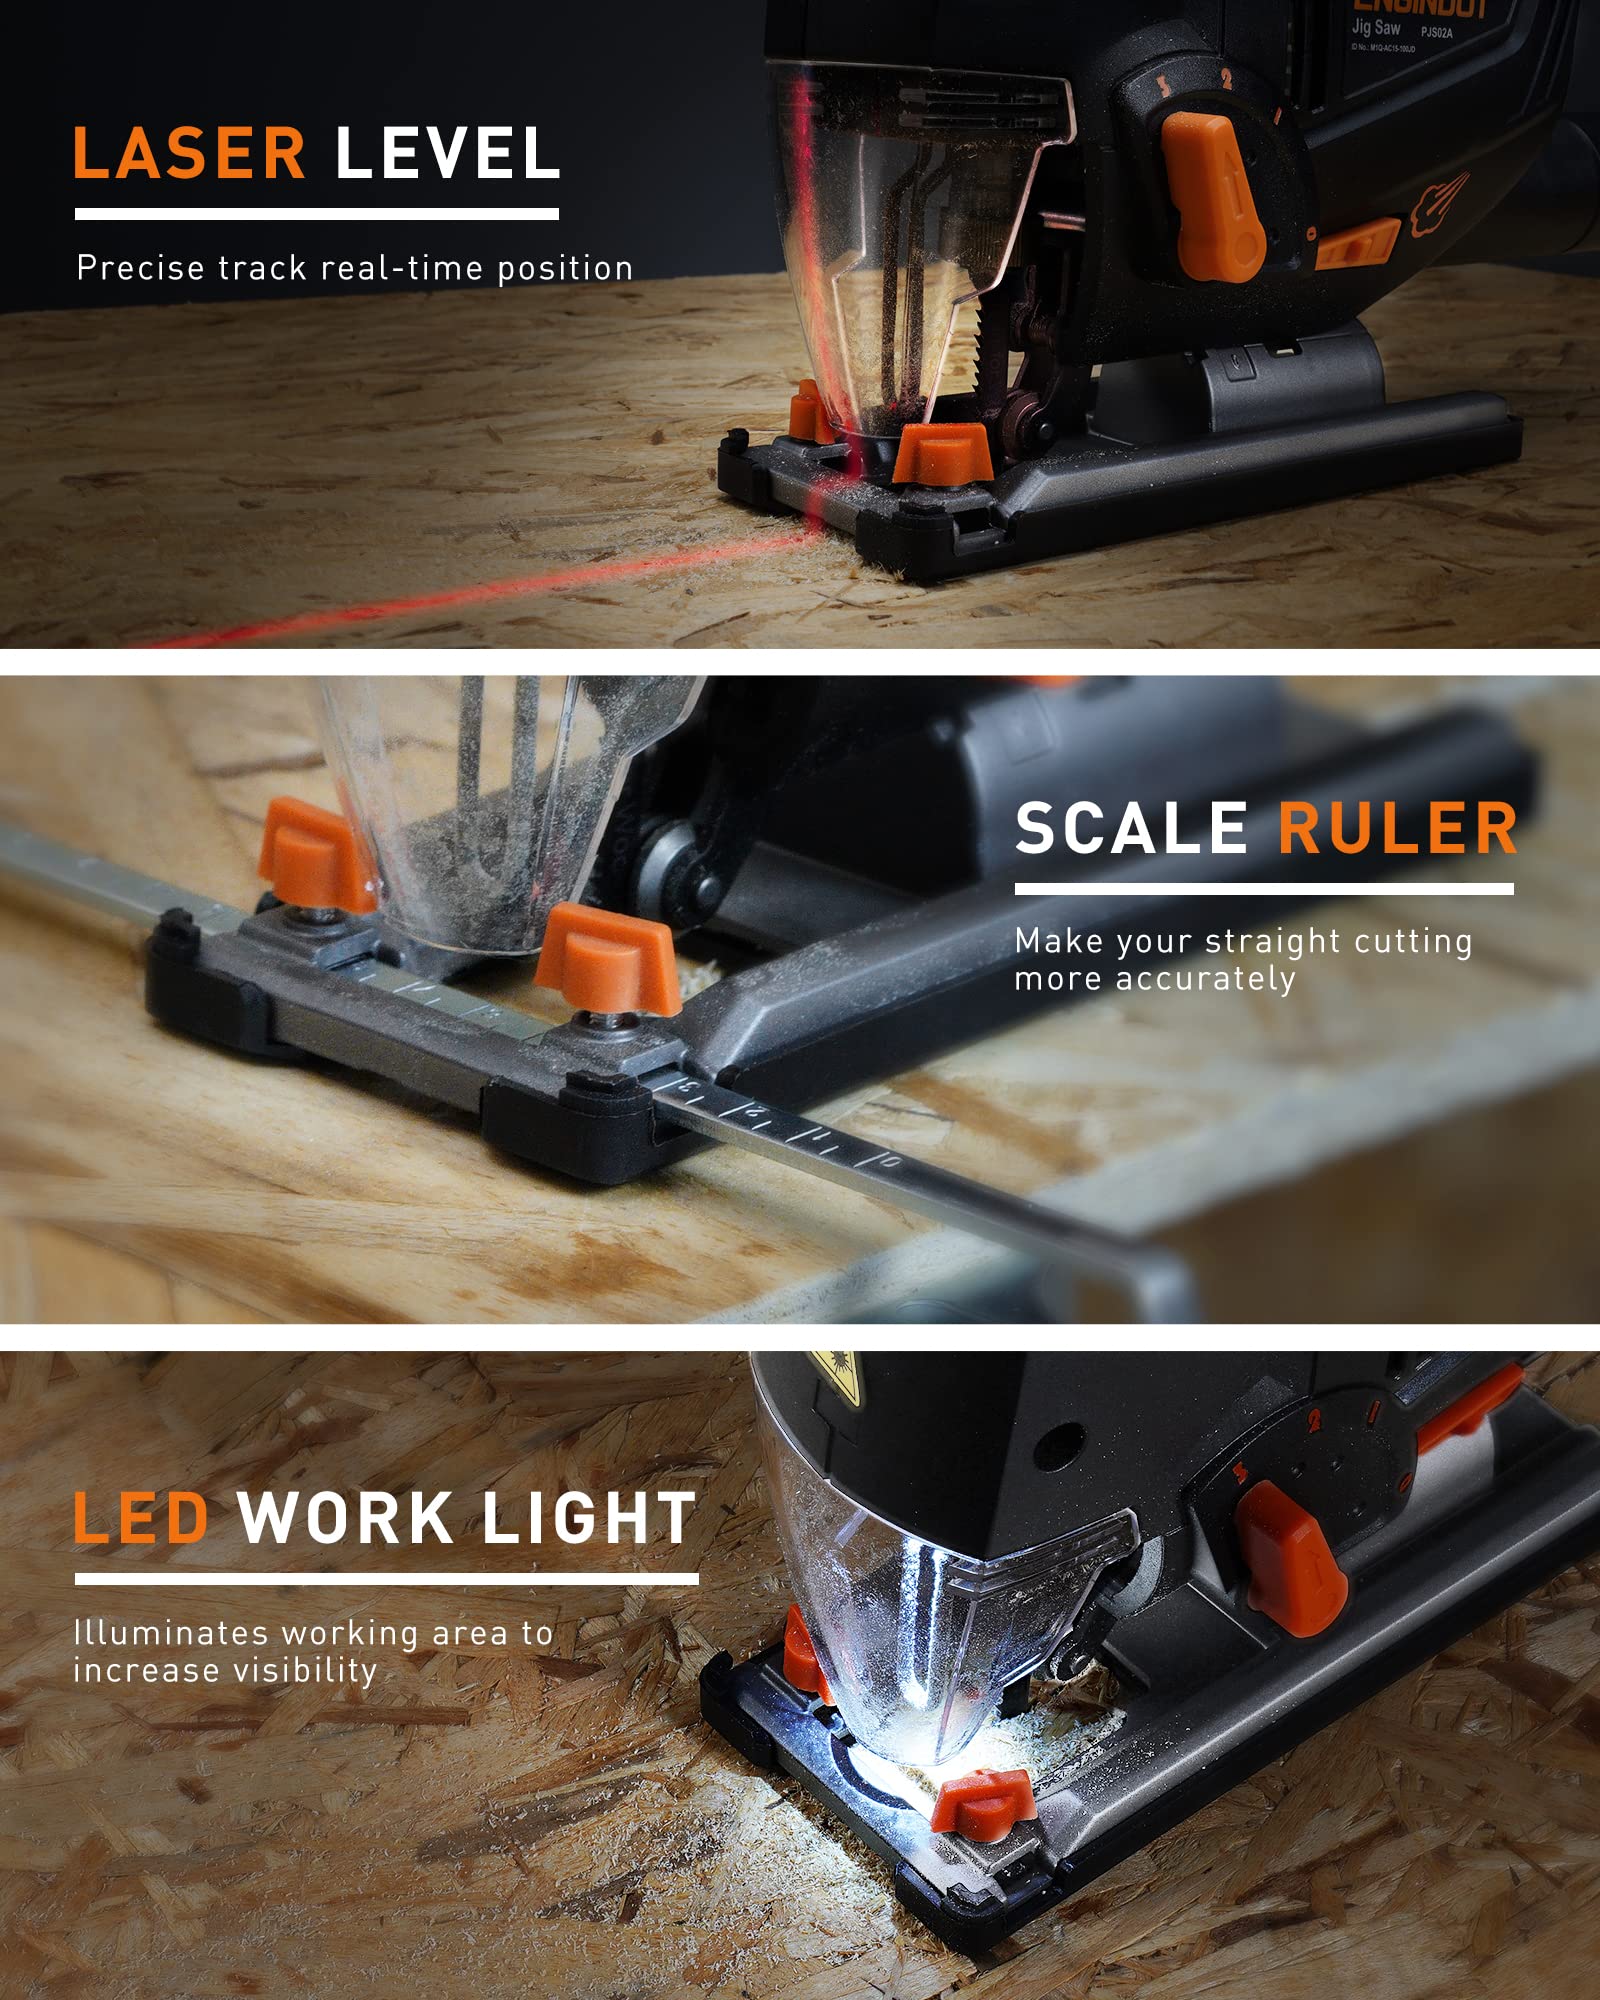 6.7 Amp 800W Jigsaw, ENGiNDOT (800-3000 SPM) Jig Saw with 6 Variable Speed, Laser & LED, 4 Orbital Sets, 6 Blades, 45° Bevel Cutting, Scale Ruler, Dust Blowing for Wood, Metal and Plastic Cutting